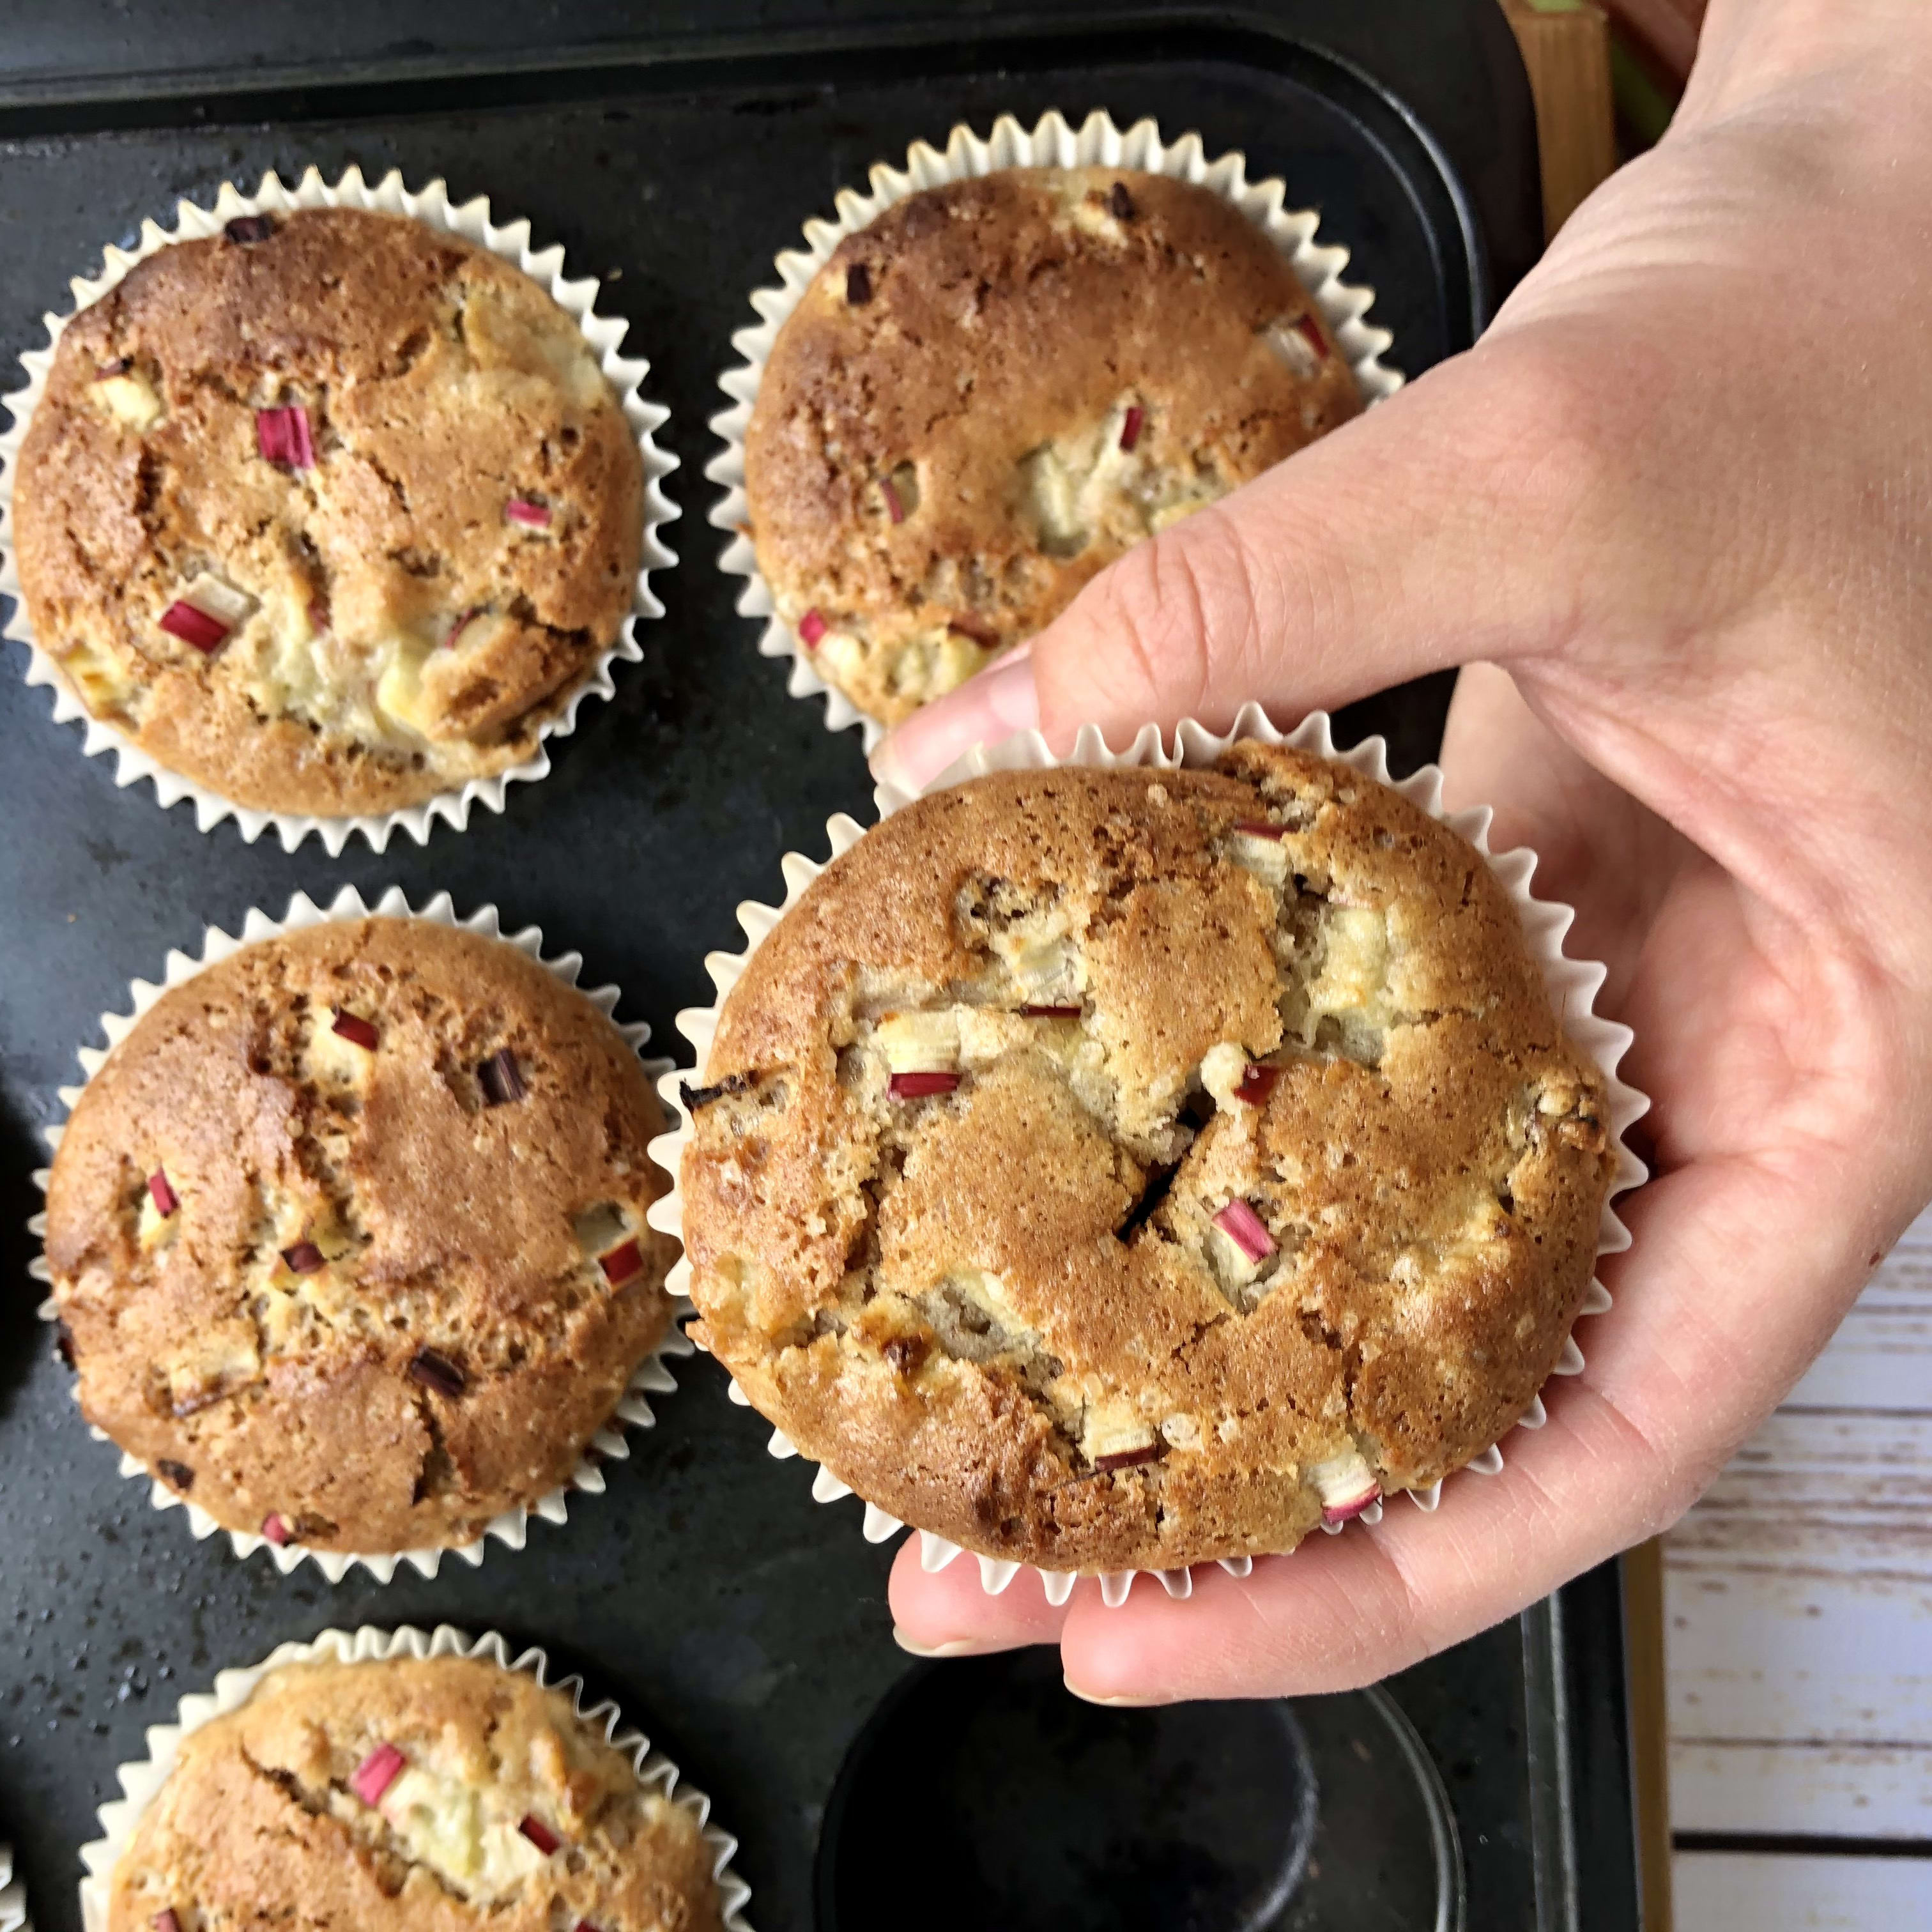 Living The Healthy Choice // Gluten-free Rhubarb Muffins